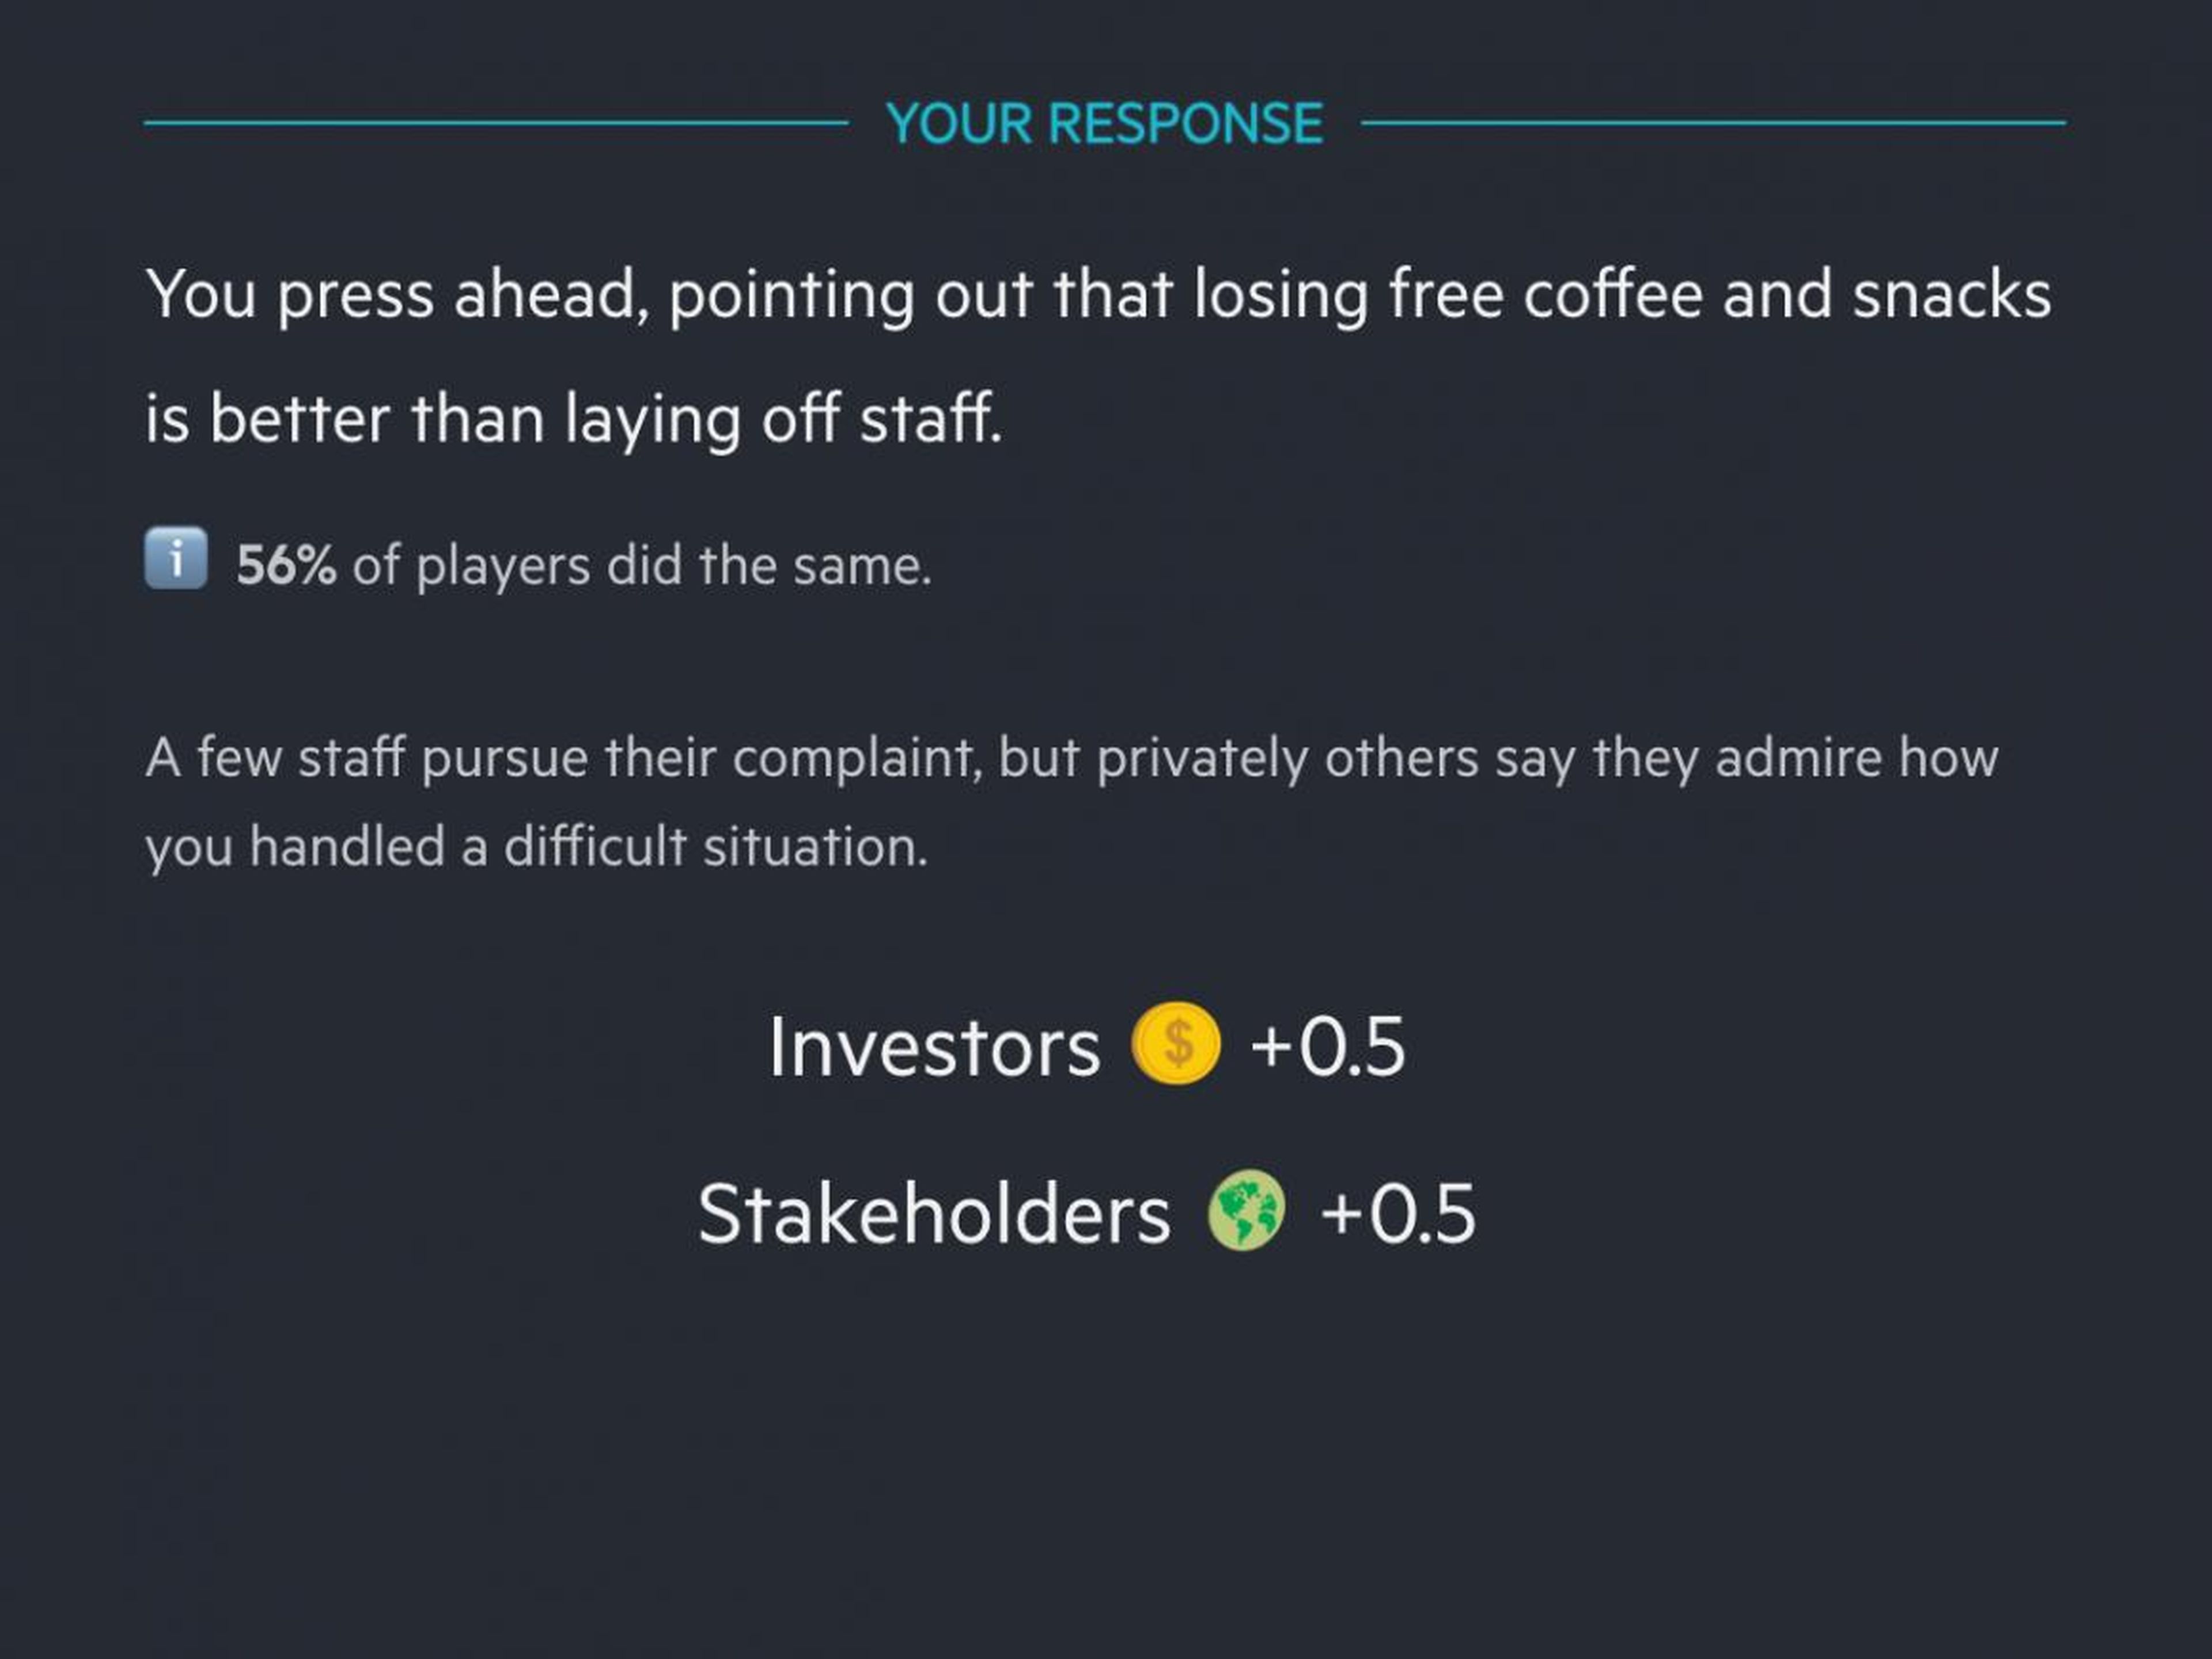 Most players agreed with me and fired the barista, and it worked!